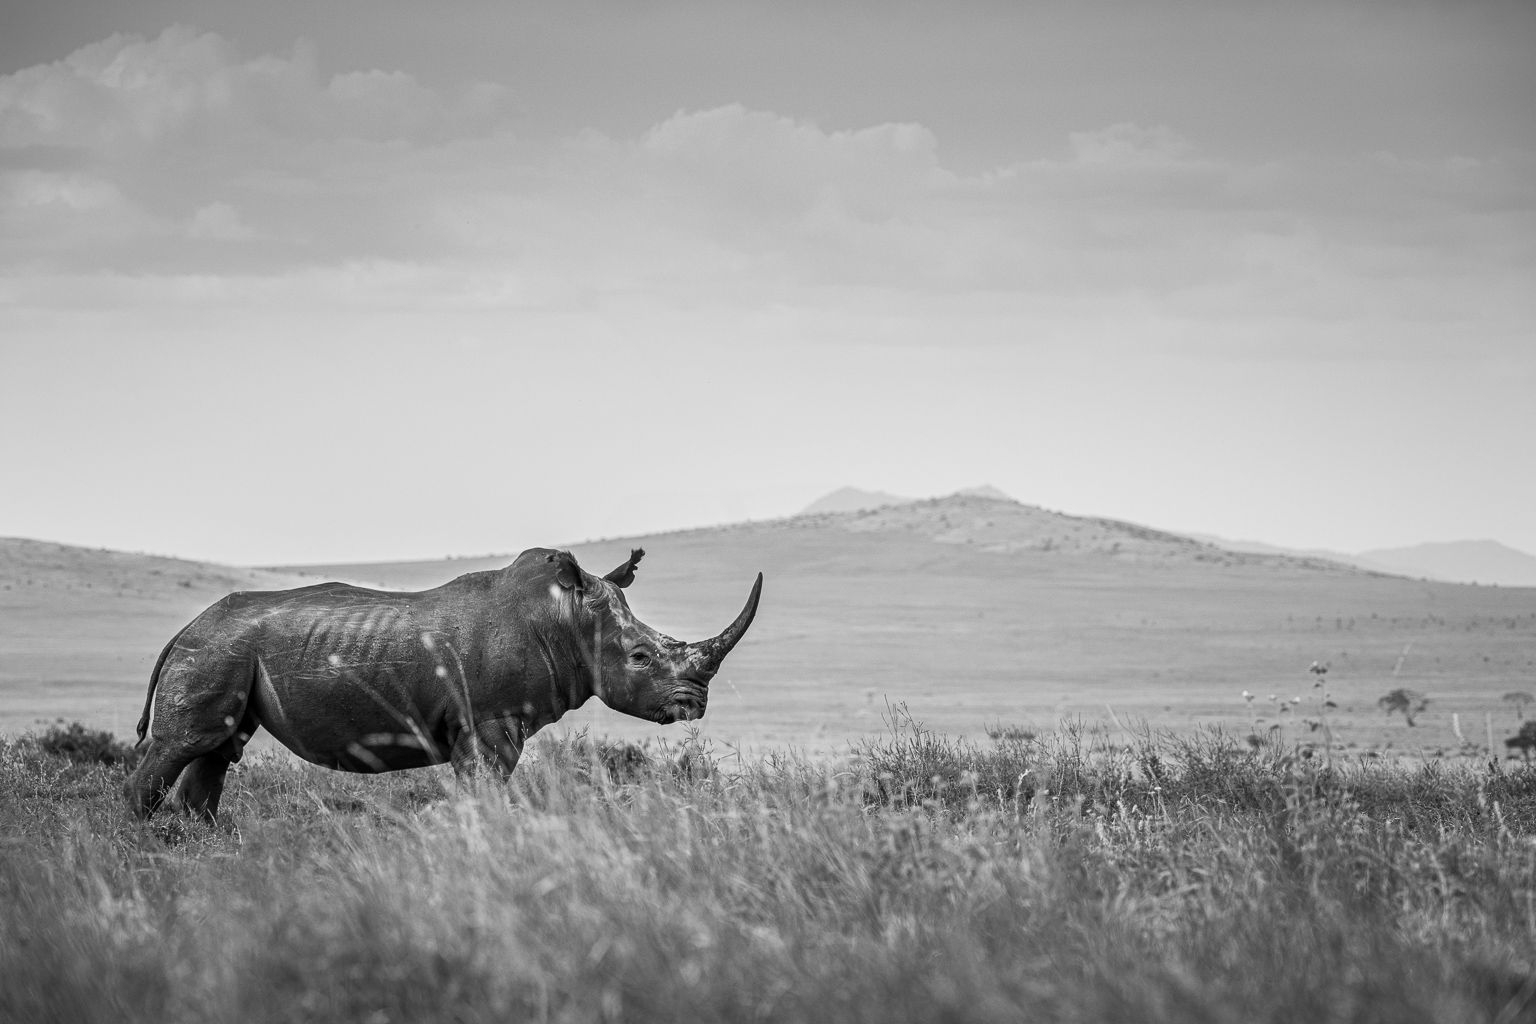 A black rhinoceros with large horn standing against a Kenyan backdrop of mountains in black and white.